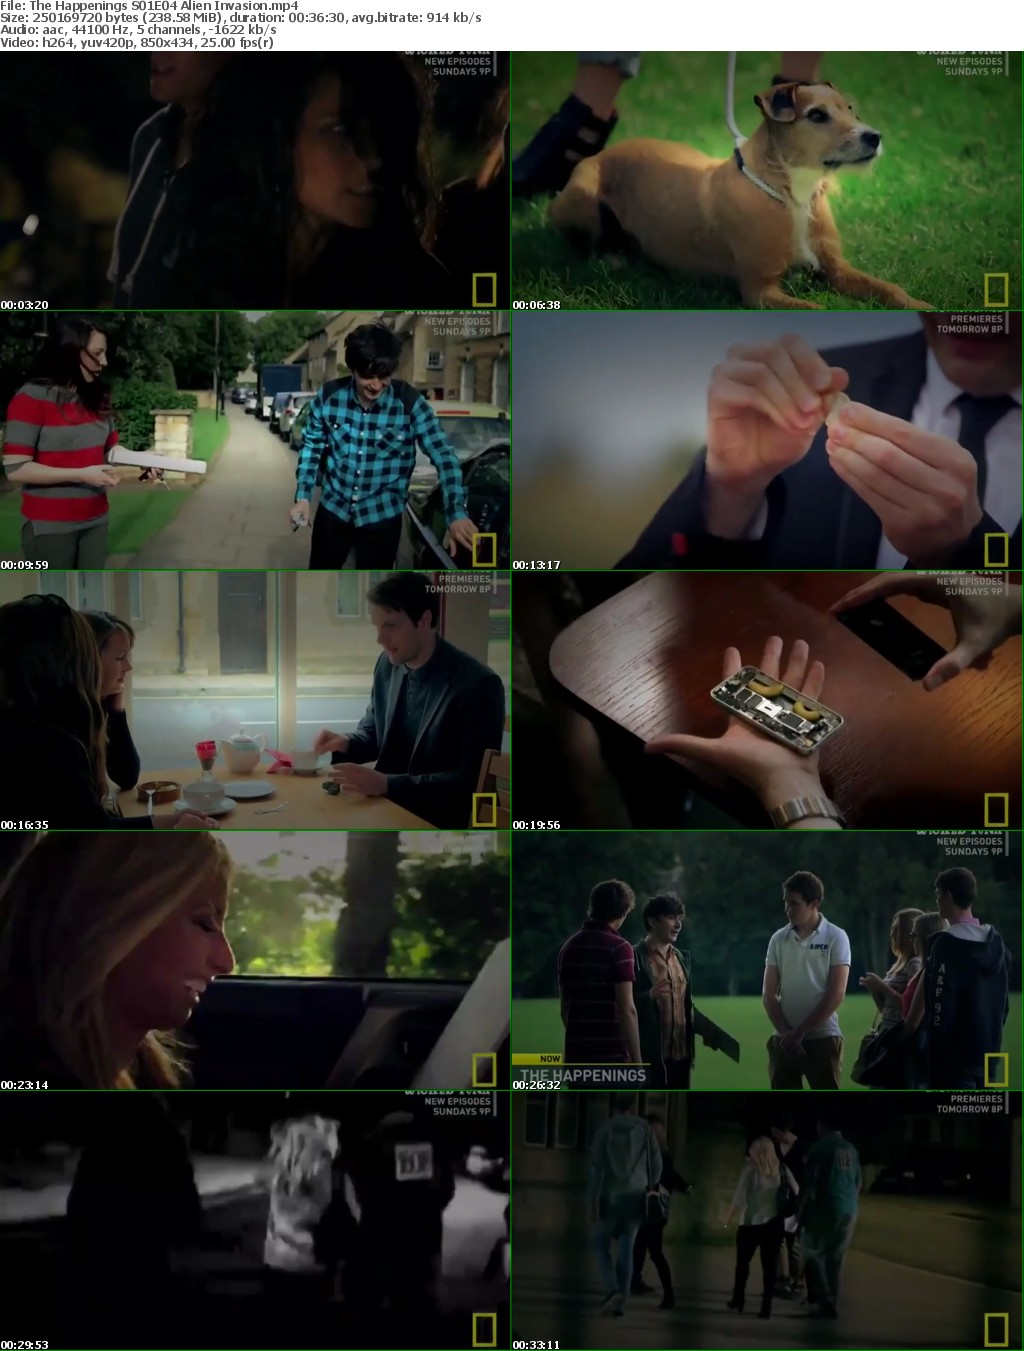 The Happenings(2013) S01 COMPLETE